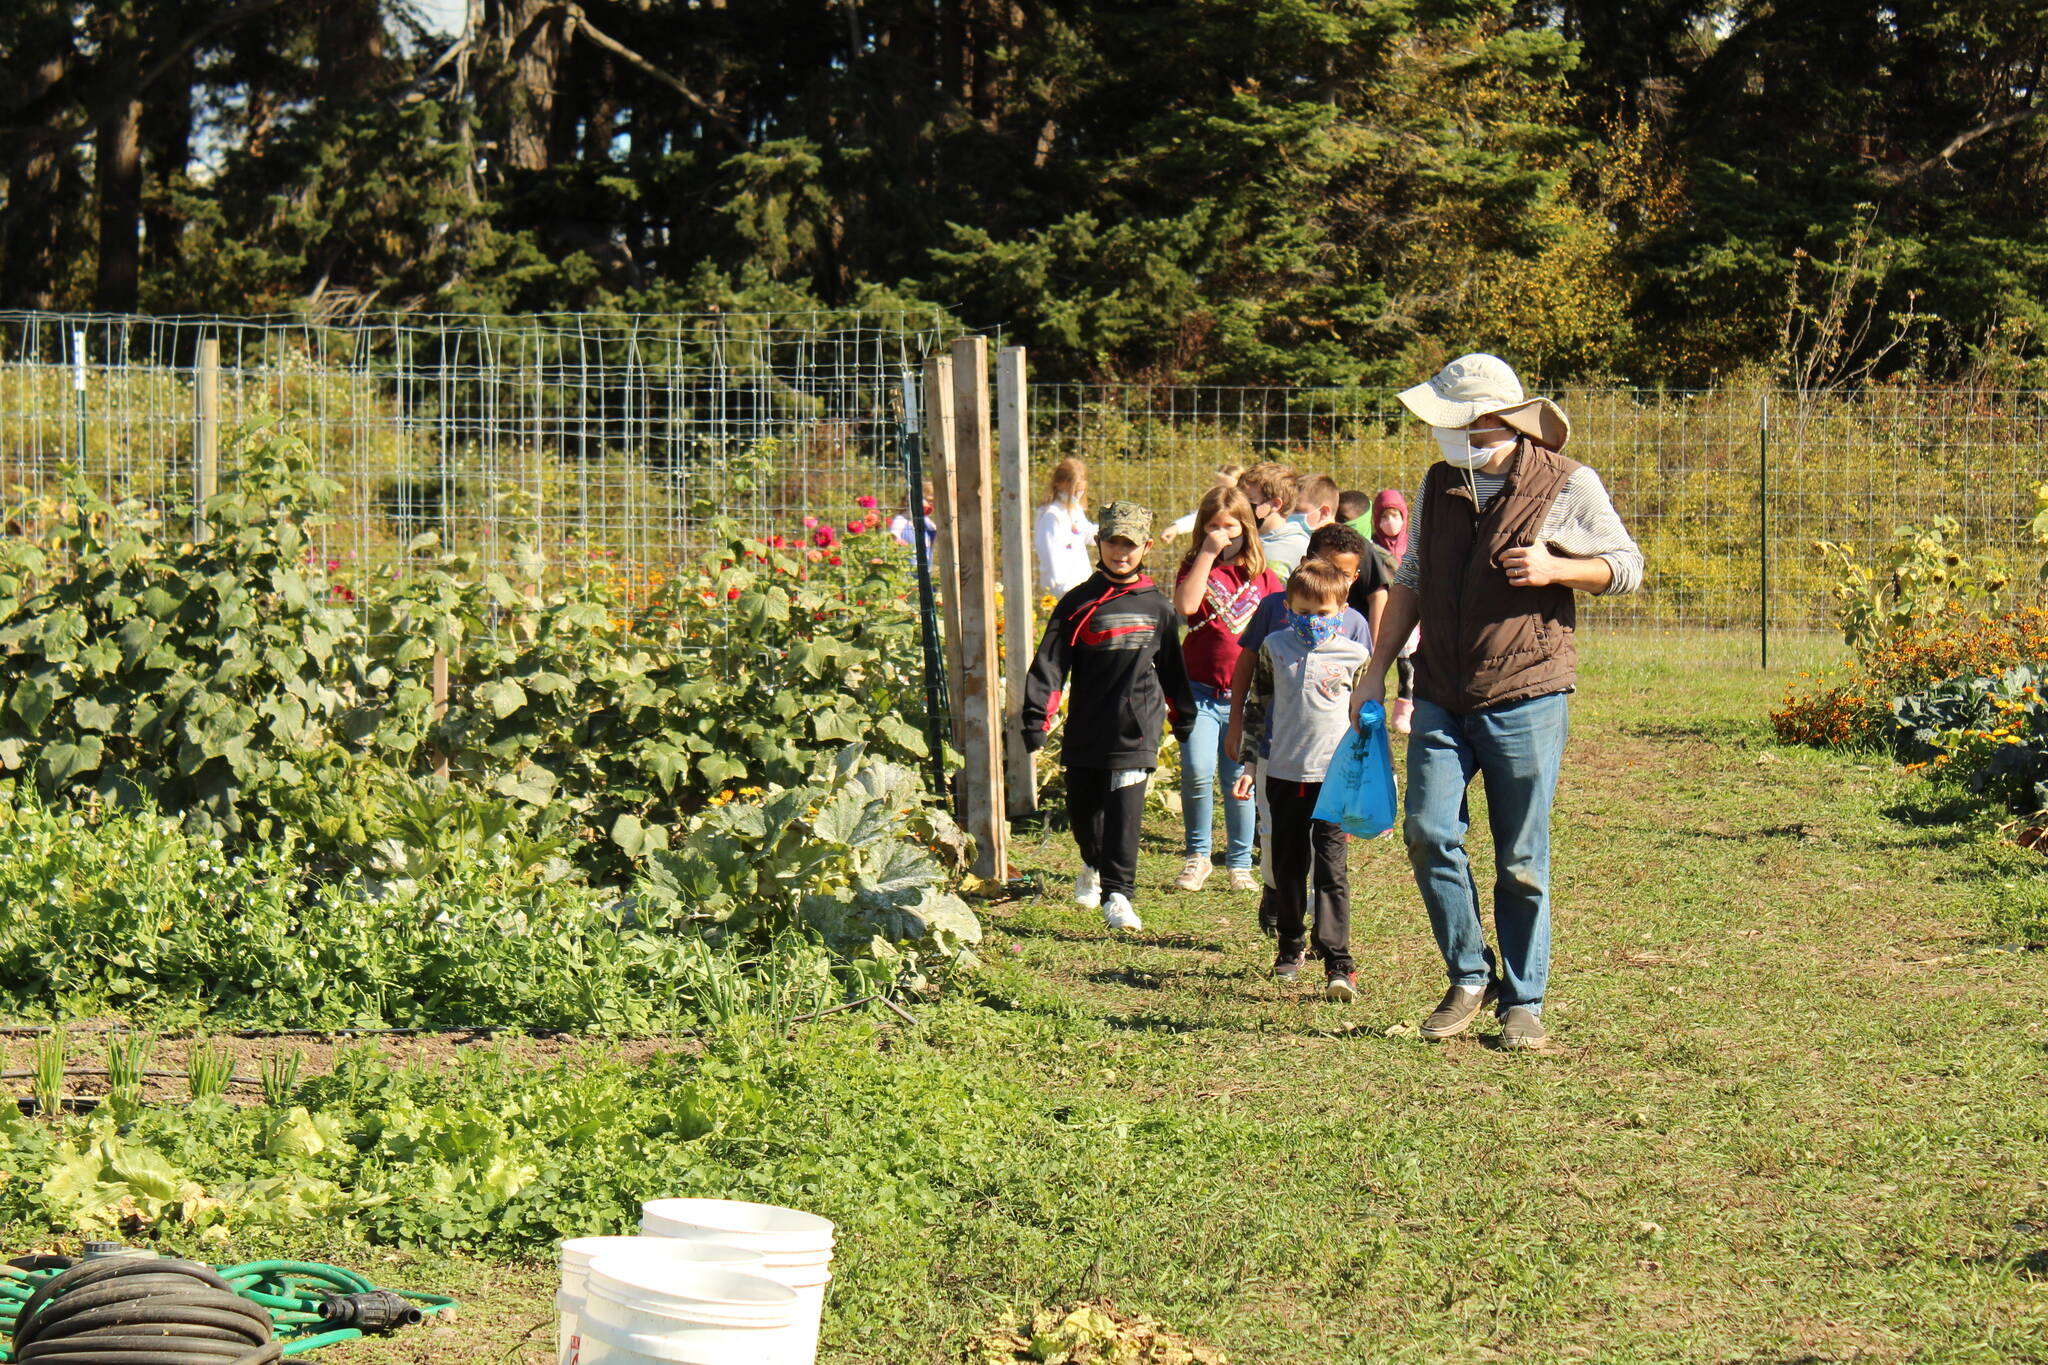 File photos by Karina Andrew/Whidbey News-Times
Coupeville Elementary School children visit the school farm in October 2021.